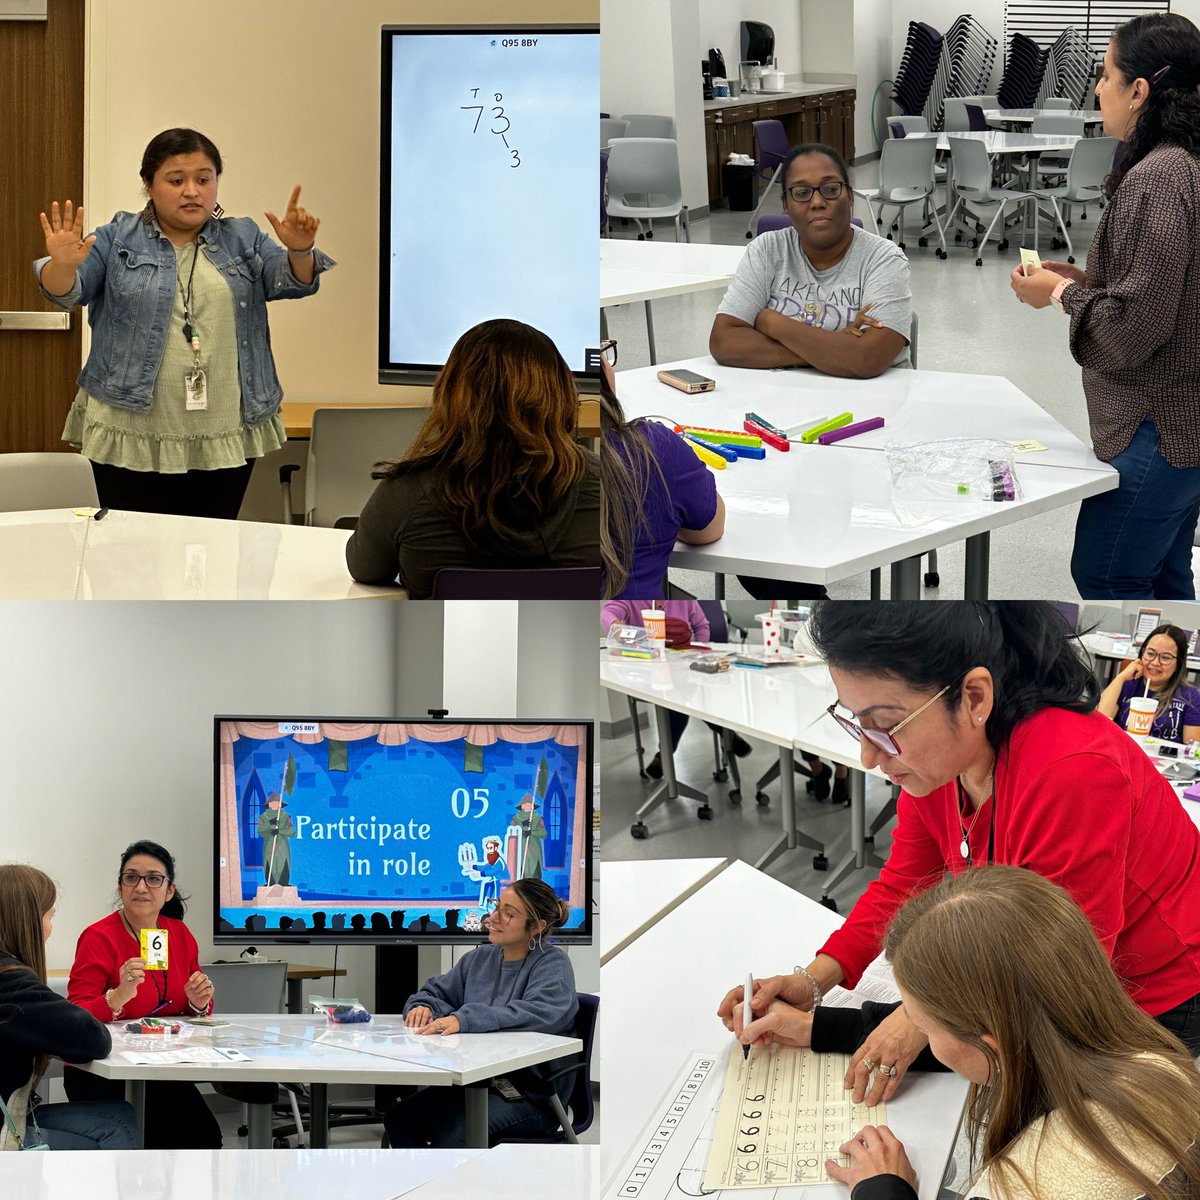 Kudos to the shining stars at @HumbleISD_LLE ⭐️Today, teachers were analyzing data, identifying areas of growth, crafting targeted small group instruction, and sharing it in a playful setting. You've truly shown a love for learning. @HumbleISD #WildcatProud #ShineaLight #SenditOn